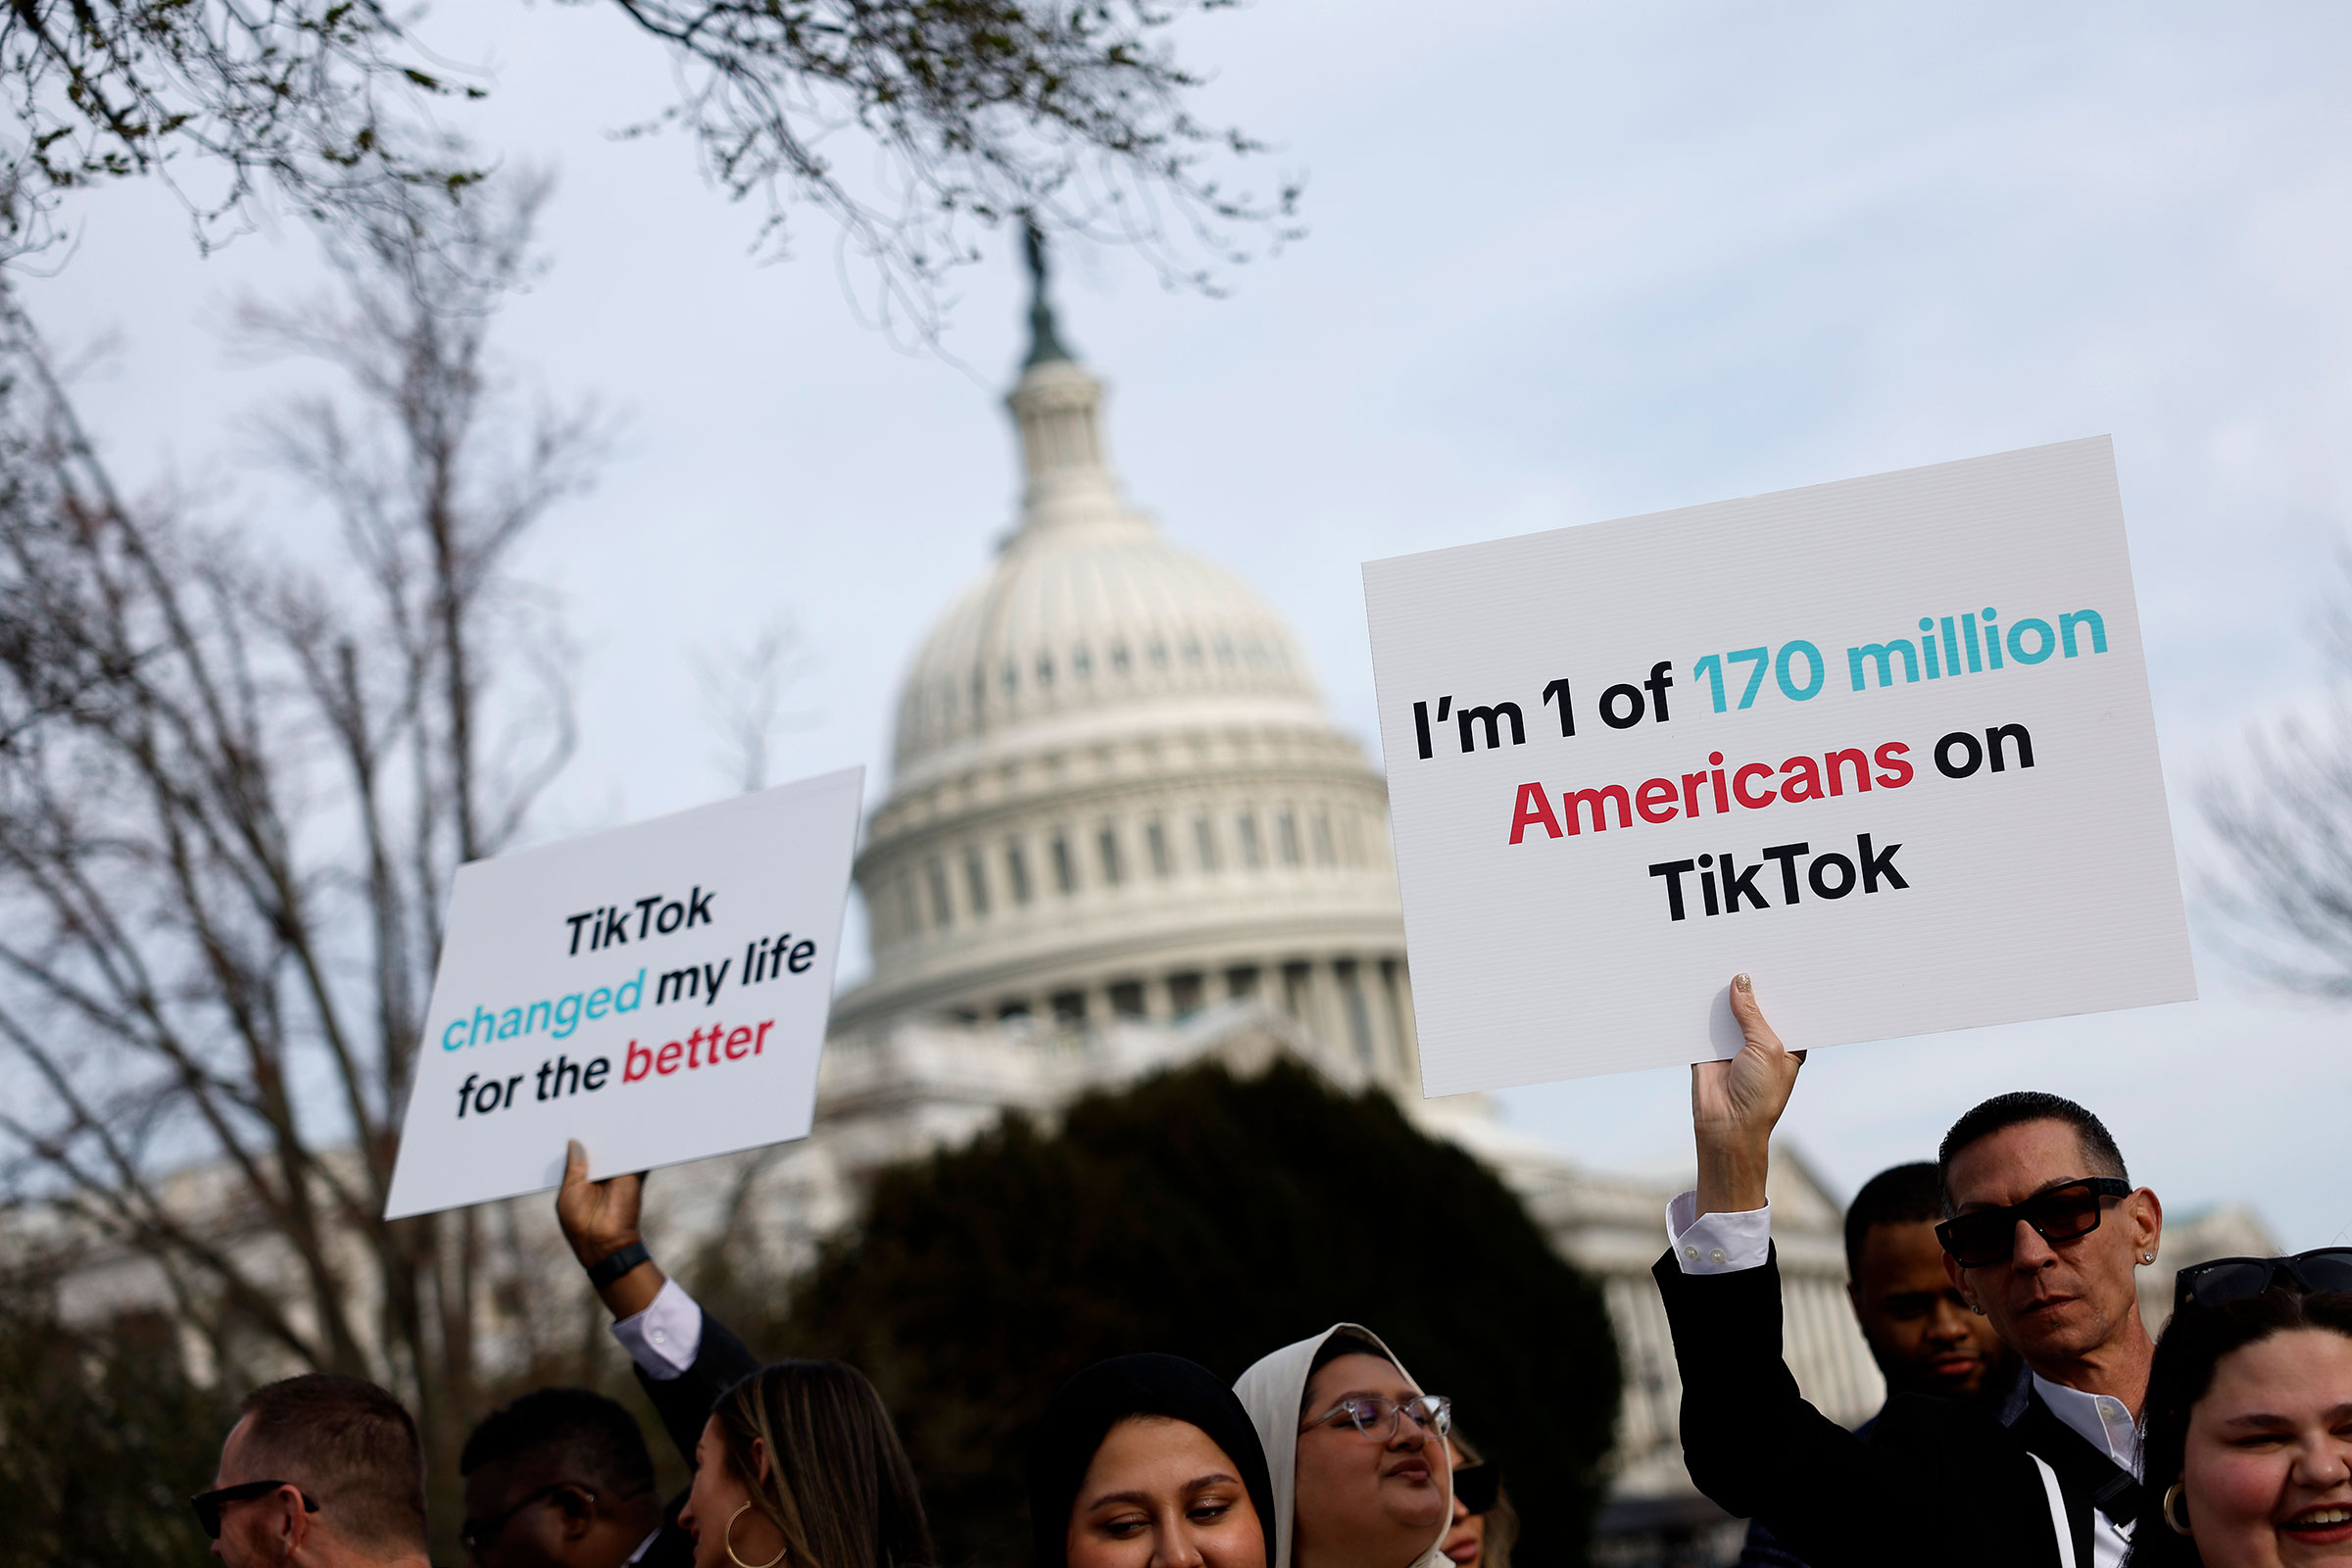  Participants hold signs in support of TikTok outside the US Capitol Building on March 13 in Washington, DC.